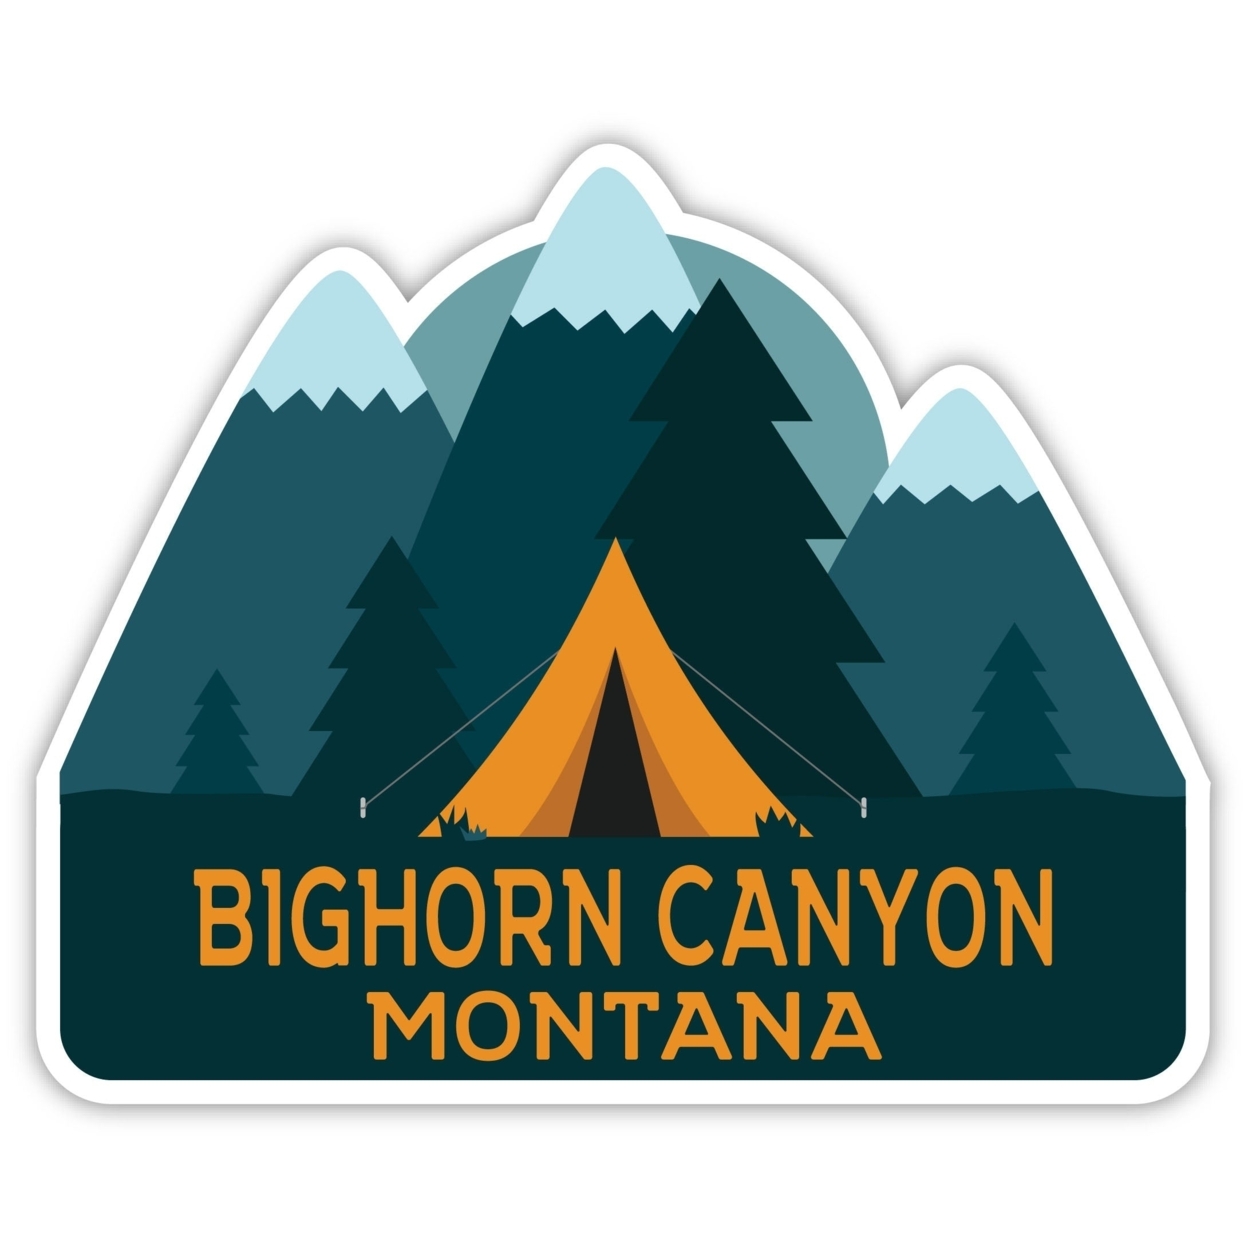 Bighorn Canyon Montana Souvenir Decorative Stickers (Choose Theme And Size) - 4-Pack, 4-Inch, Tent